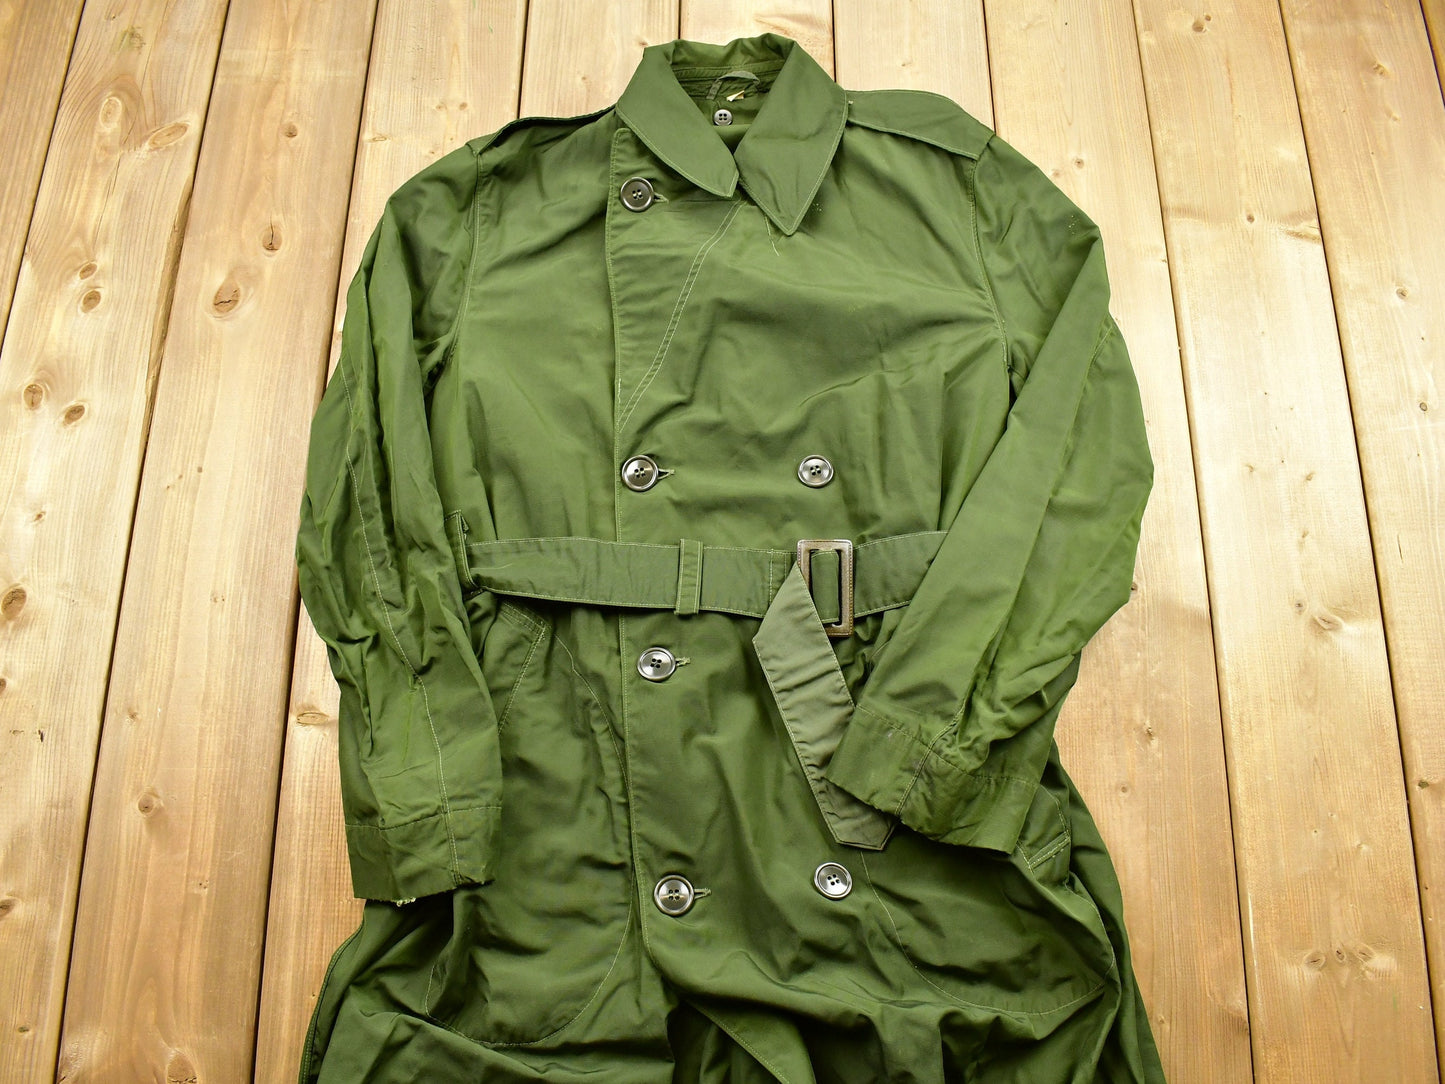 Vintage 1950s US Army Raincoat Size 36R / Military Apparel / Overcoat / True Vintage / Army Jacket / Historical / Formal Wear